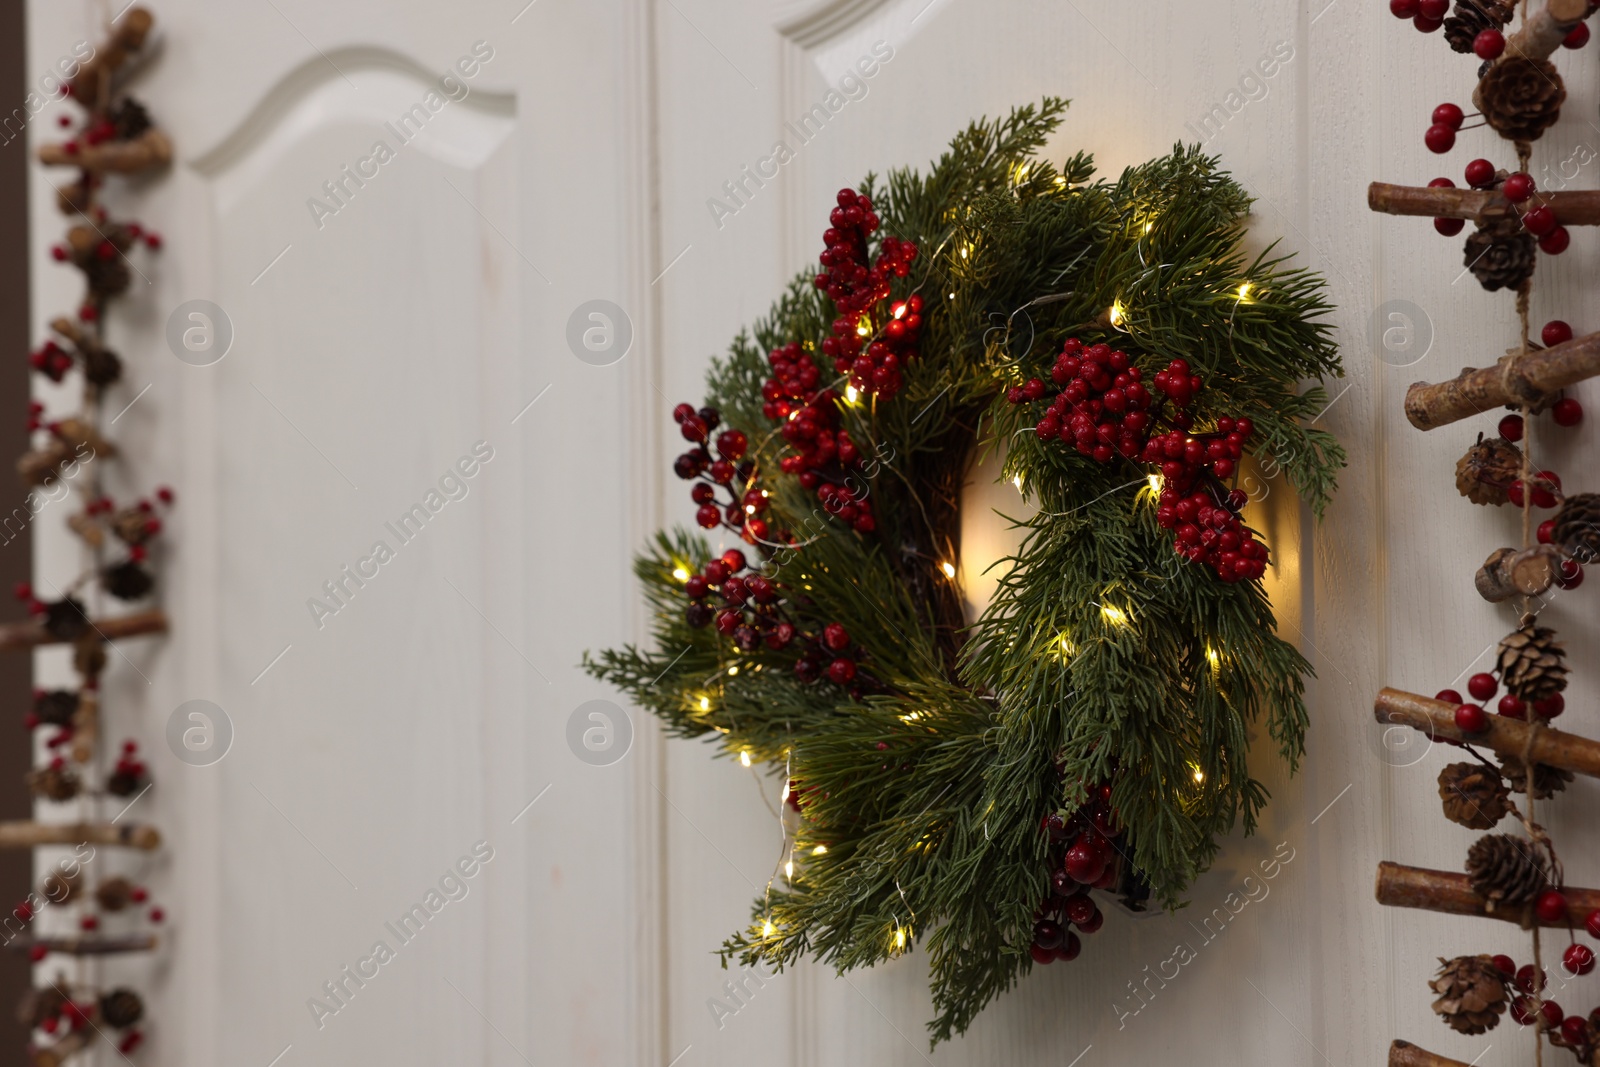 Photo of Beautiful Christmas wreath with red berries and fairy lights hanging on white door, space for text